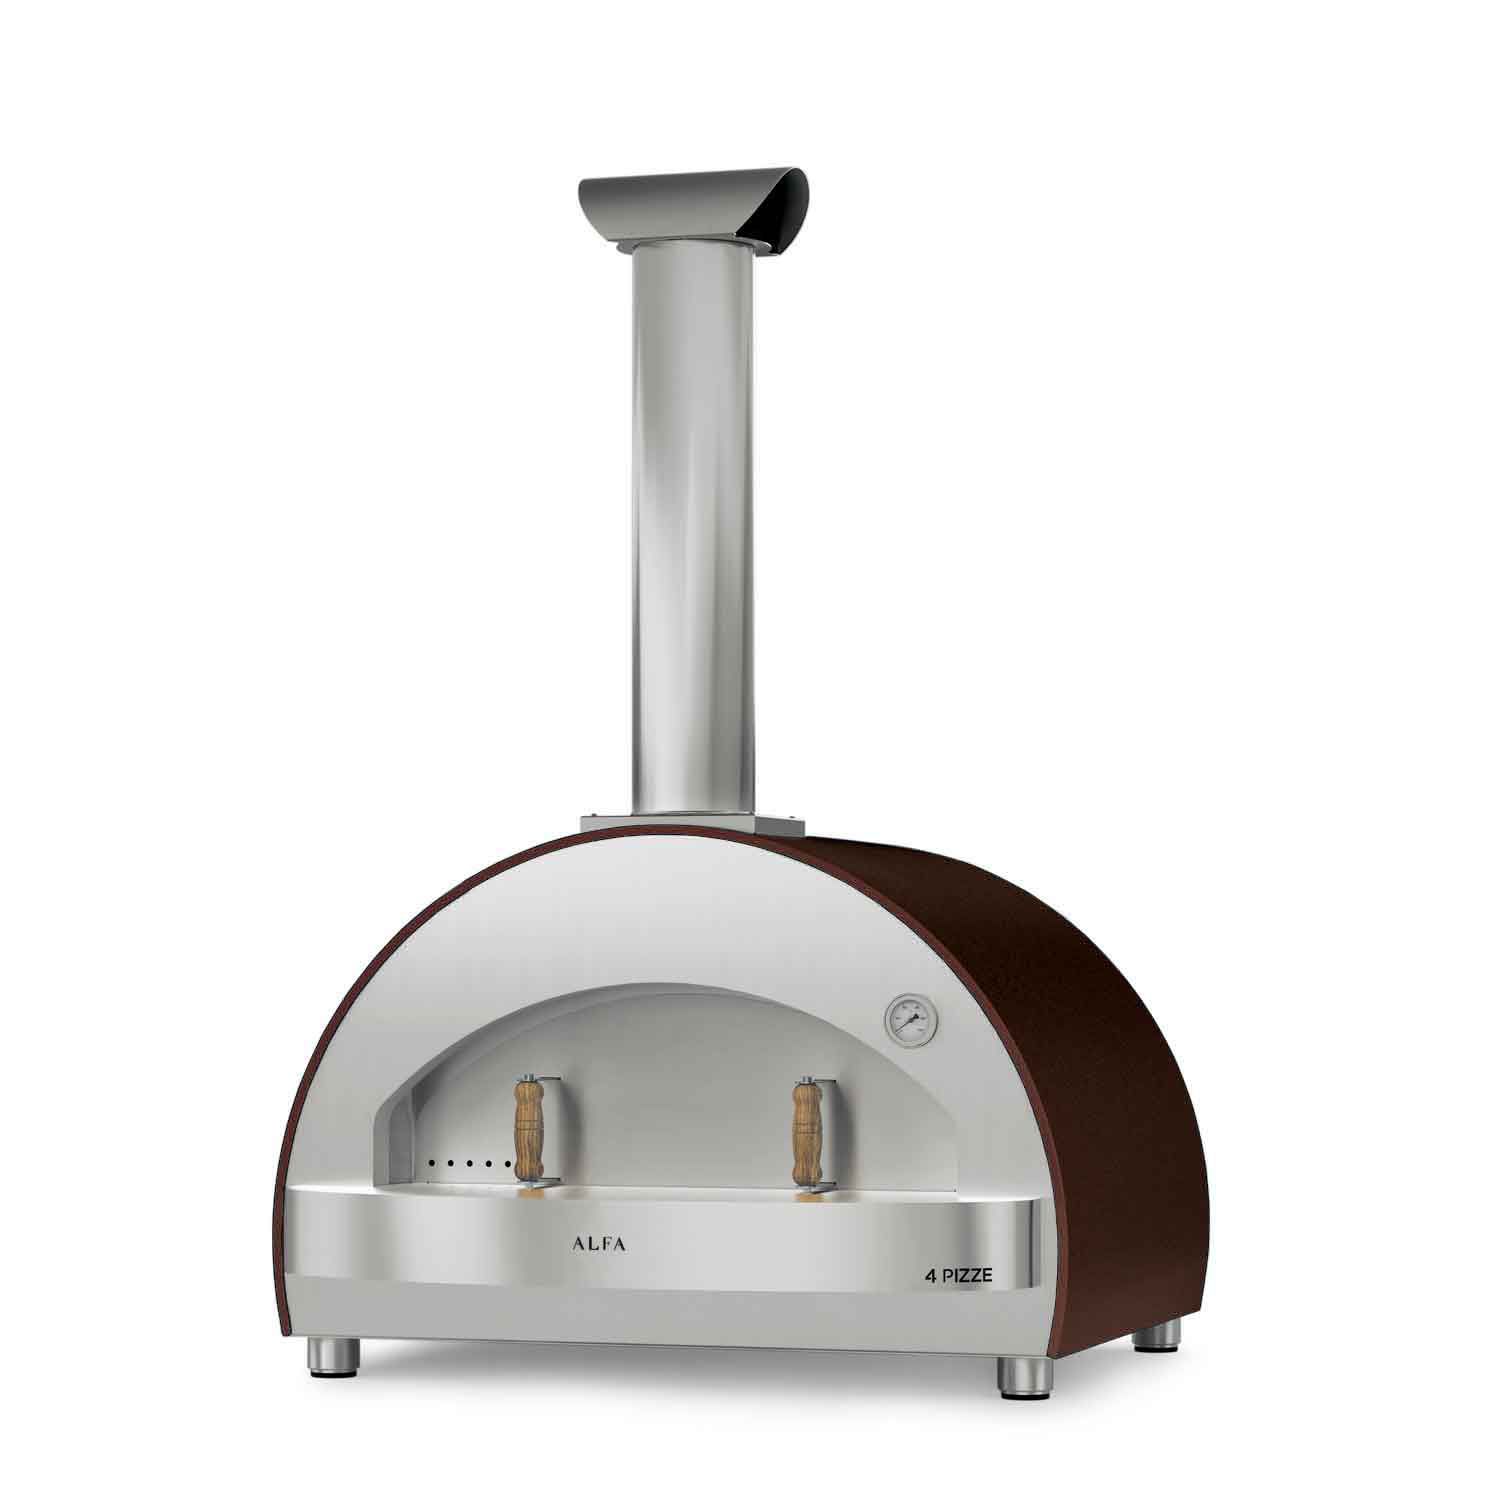 Authentic Pizza Ovens 5 Piece Pizza Oven Starter Kit